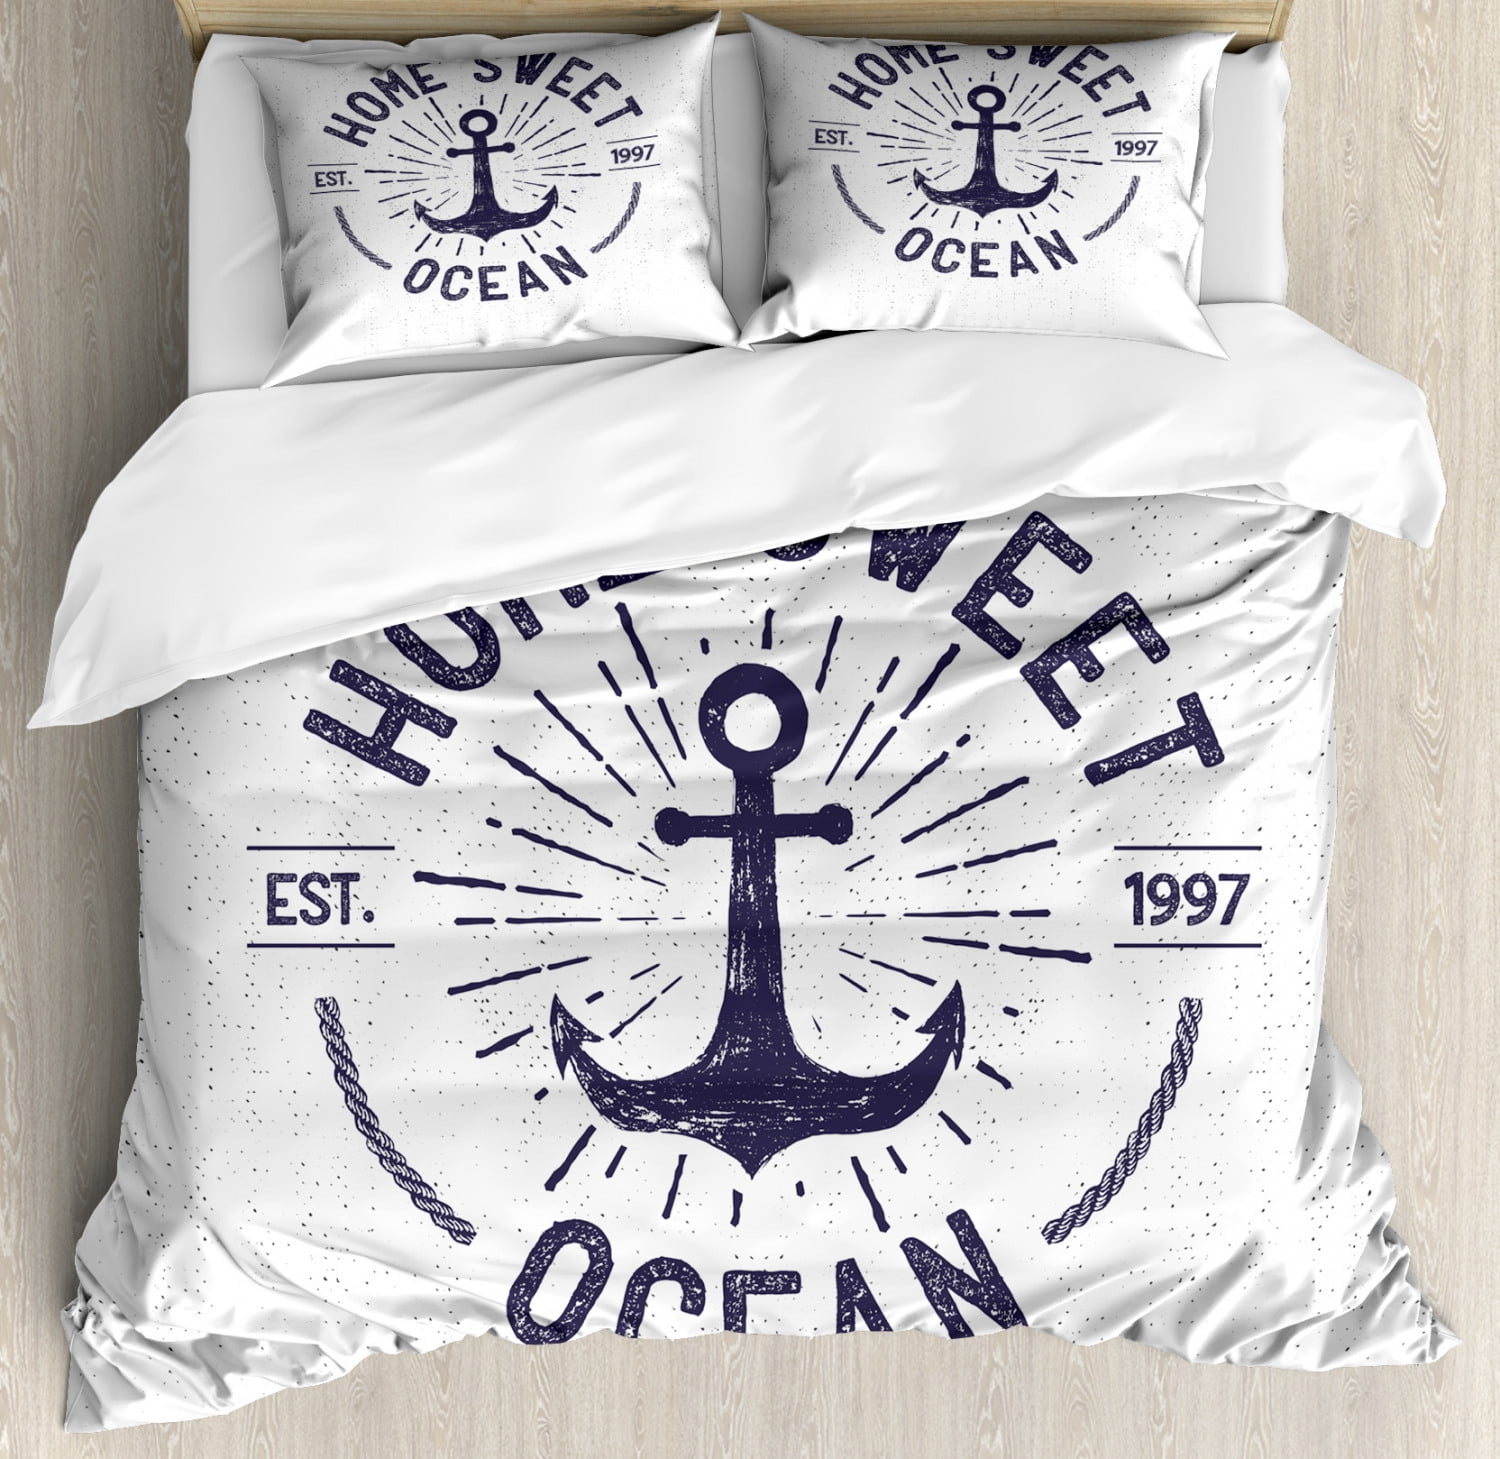 Nautical Anchor Quilt Twin Full/Queen or King Navy Blue Bedspread Bedding Set 